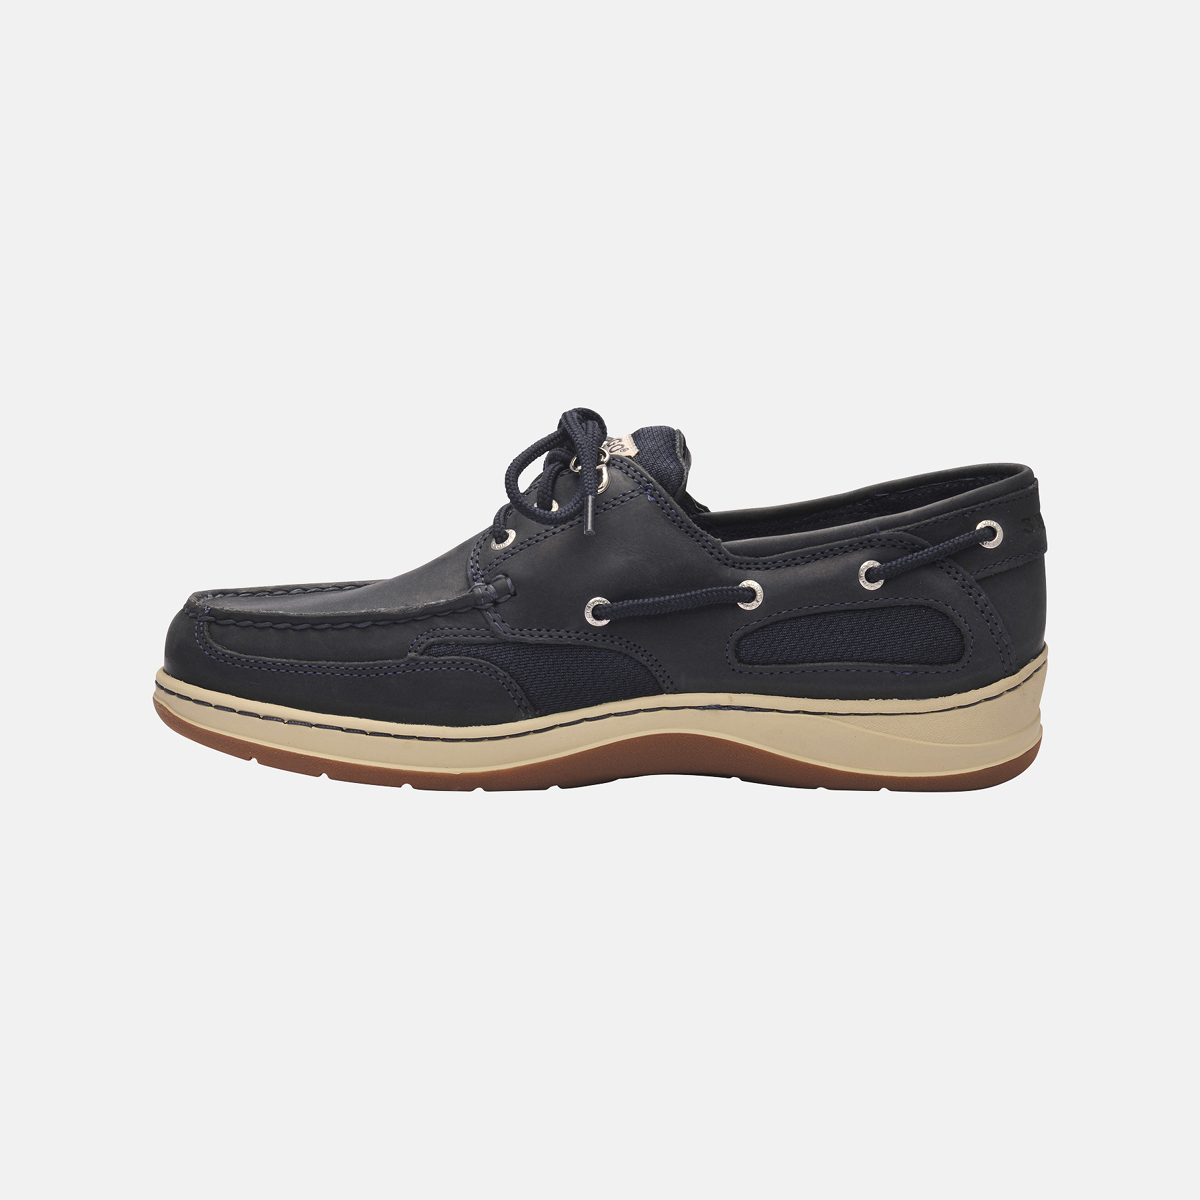 Sebago Clovehitch II chaussures bateau homme blue navy leather, taille 44,5 (US 10.5)